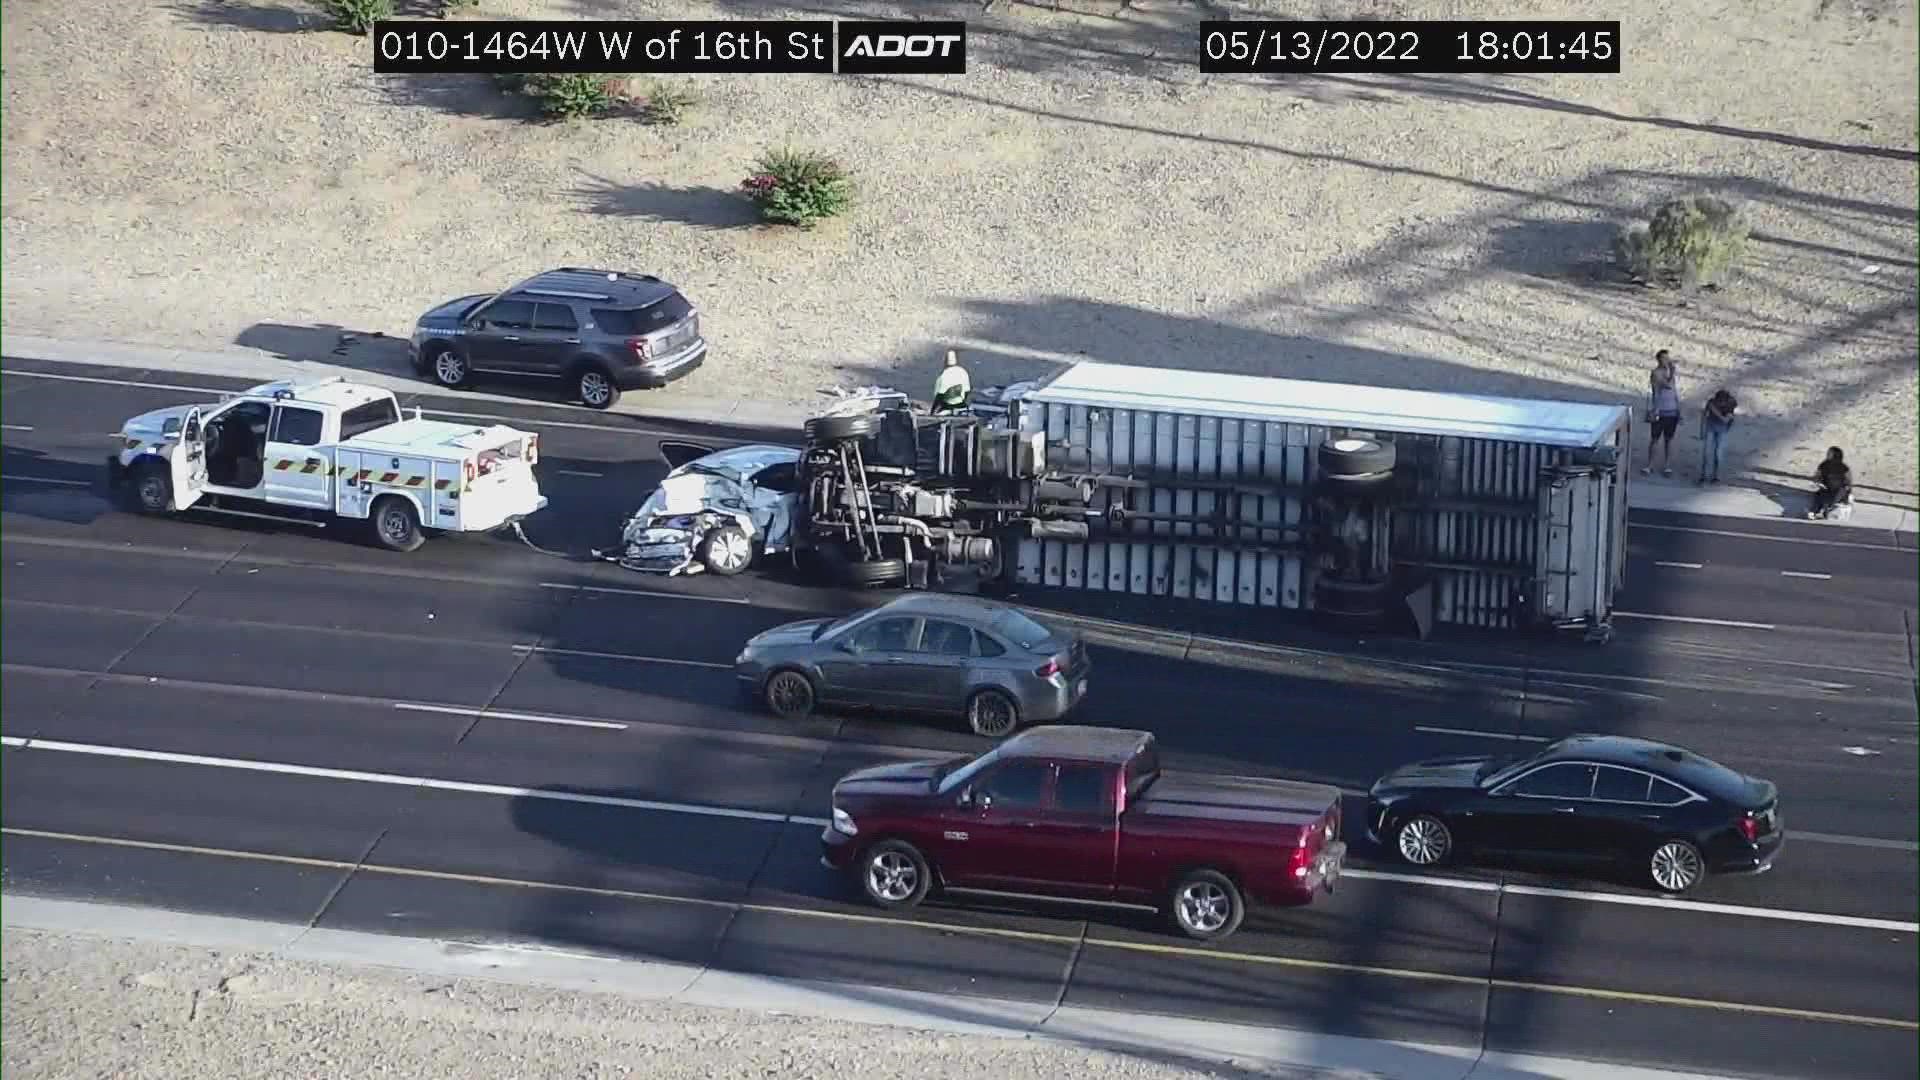 Traffic is massively delayed in Downtown Phoenix due to an accident involving a semi-truck on I-10 near 16th Street. Four different vehicles are involved.